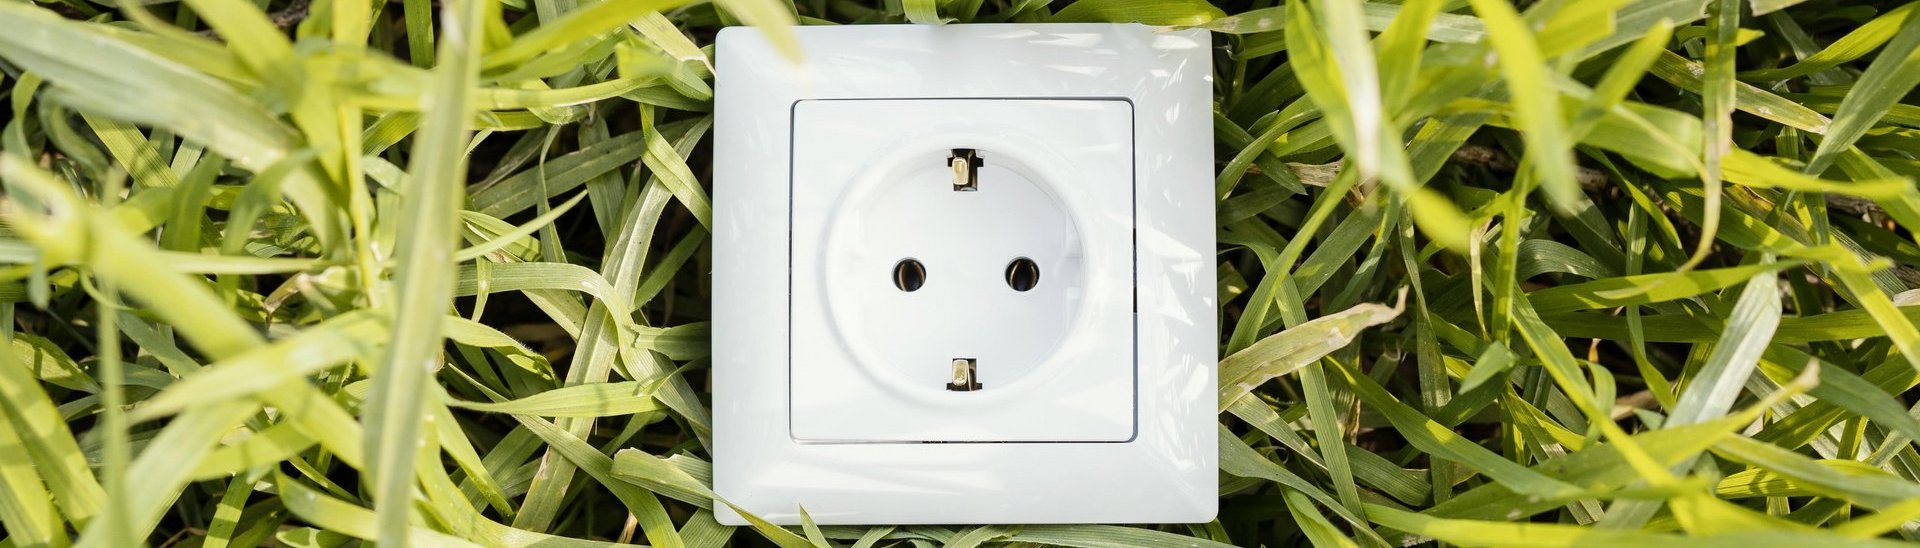 top-view-electric-socket-green-grass